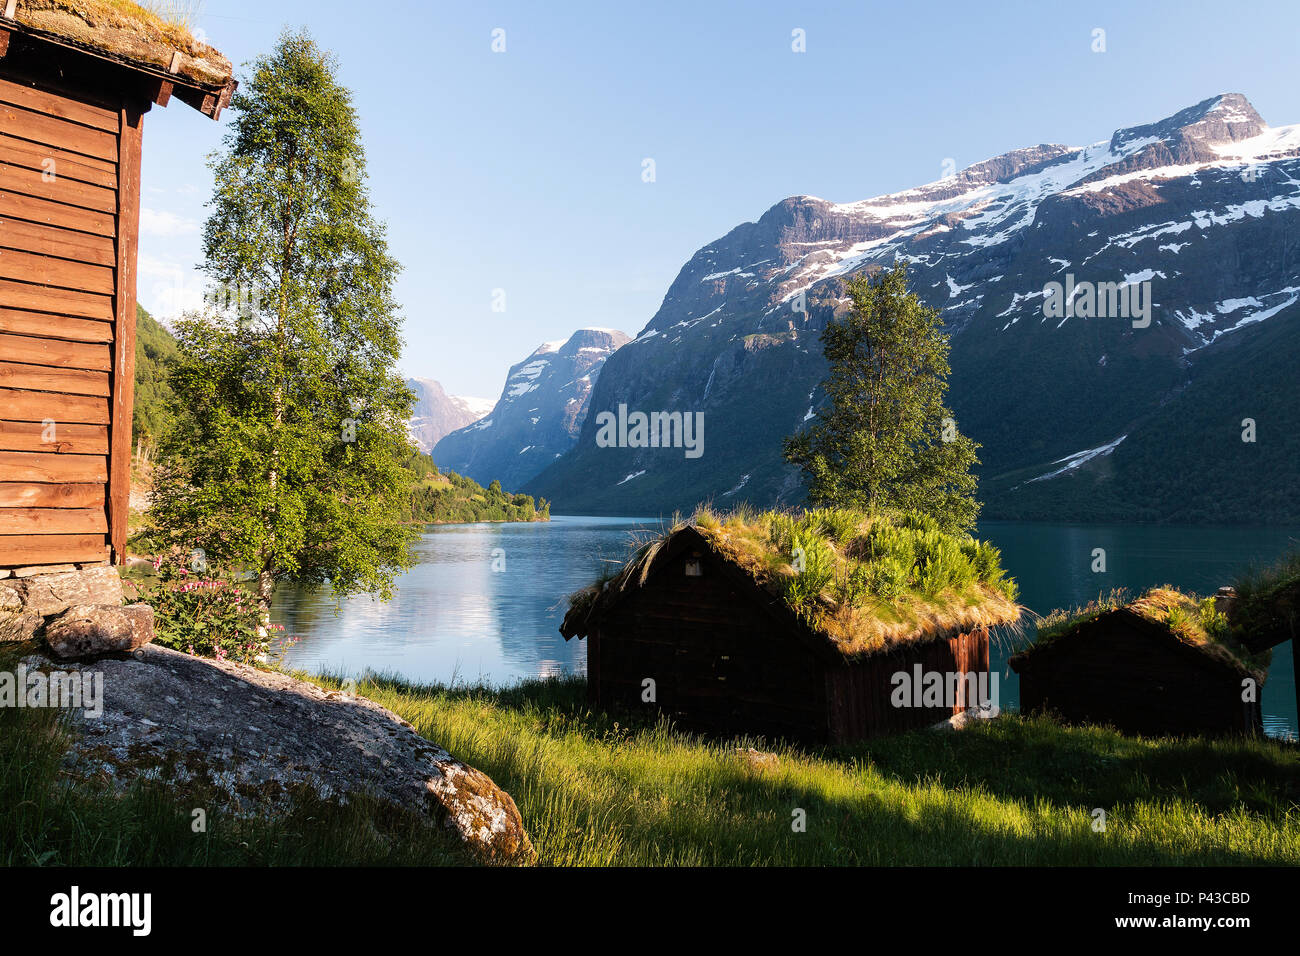 Breng seter at lake Lovatnet, Stryn. Norway. Cattle, sheep goats, even pigs, were brought here (til seters) for summer pastures Stock Photo